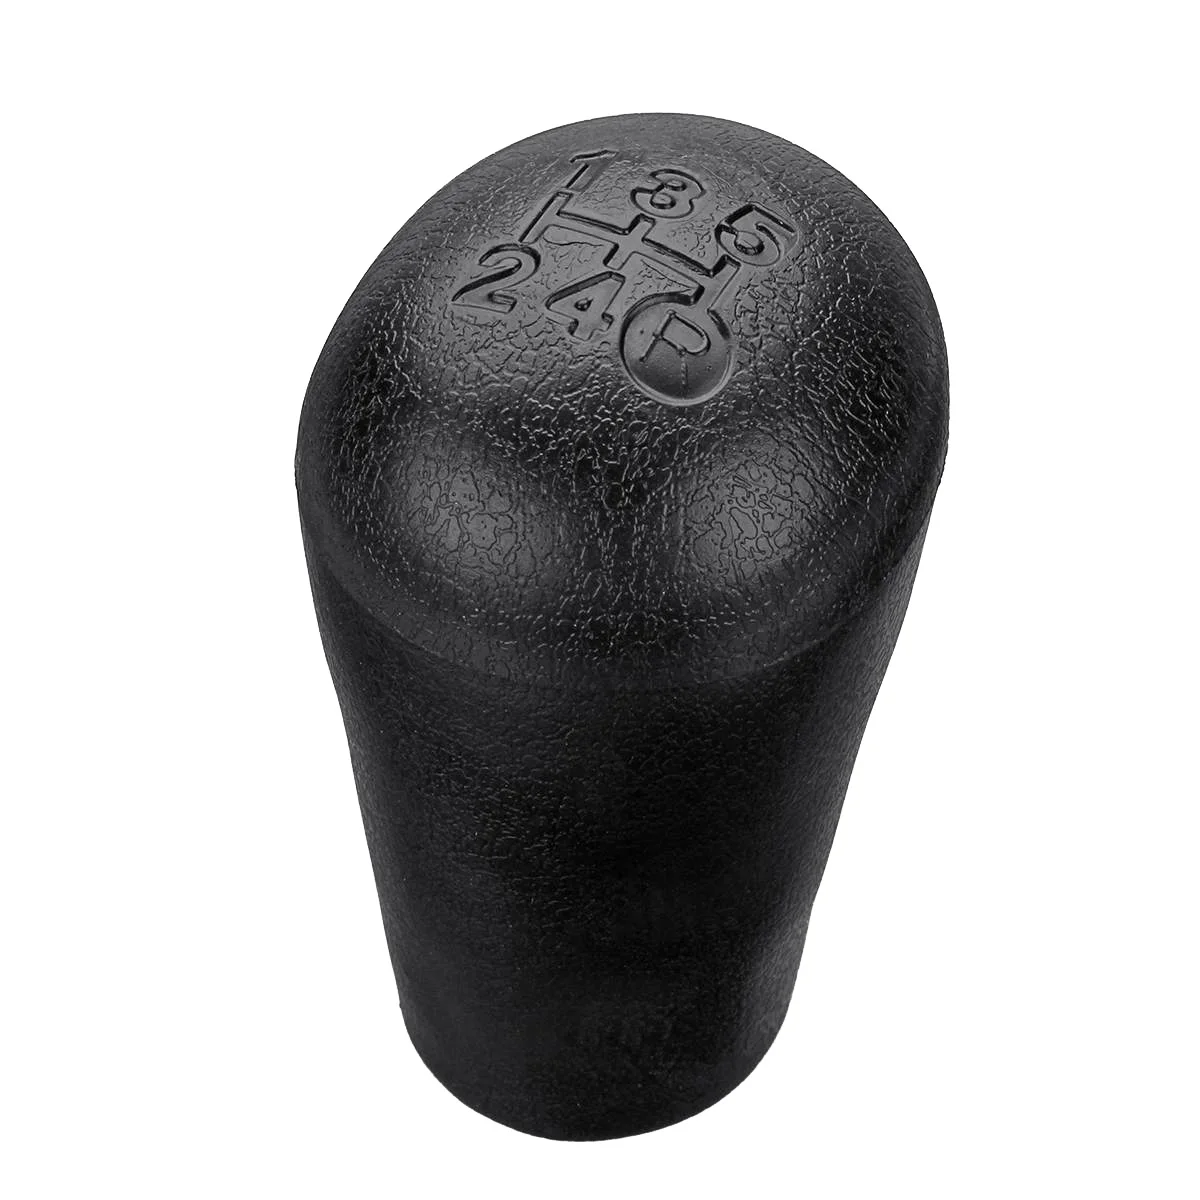 

5 Speed Manual Car Gear Shift Knob Shifter Lever for Toyota 1996-2001 4Runner 1995-2004 Tacoma